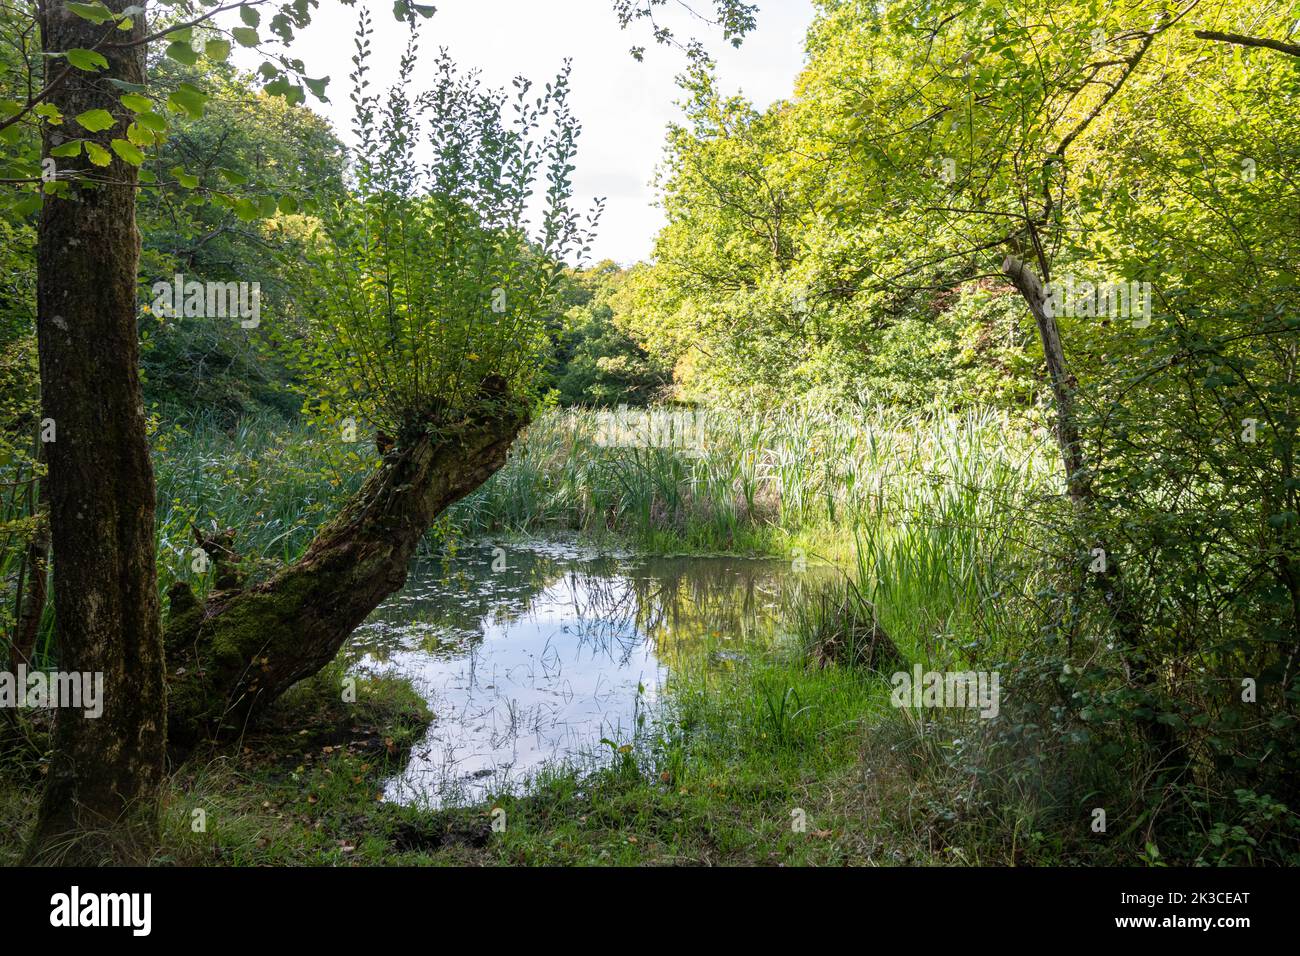 View of a pond in Ebernoe Common National Nature Reserve, West Sussex, England, UK Stock Photo